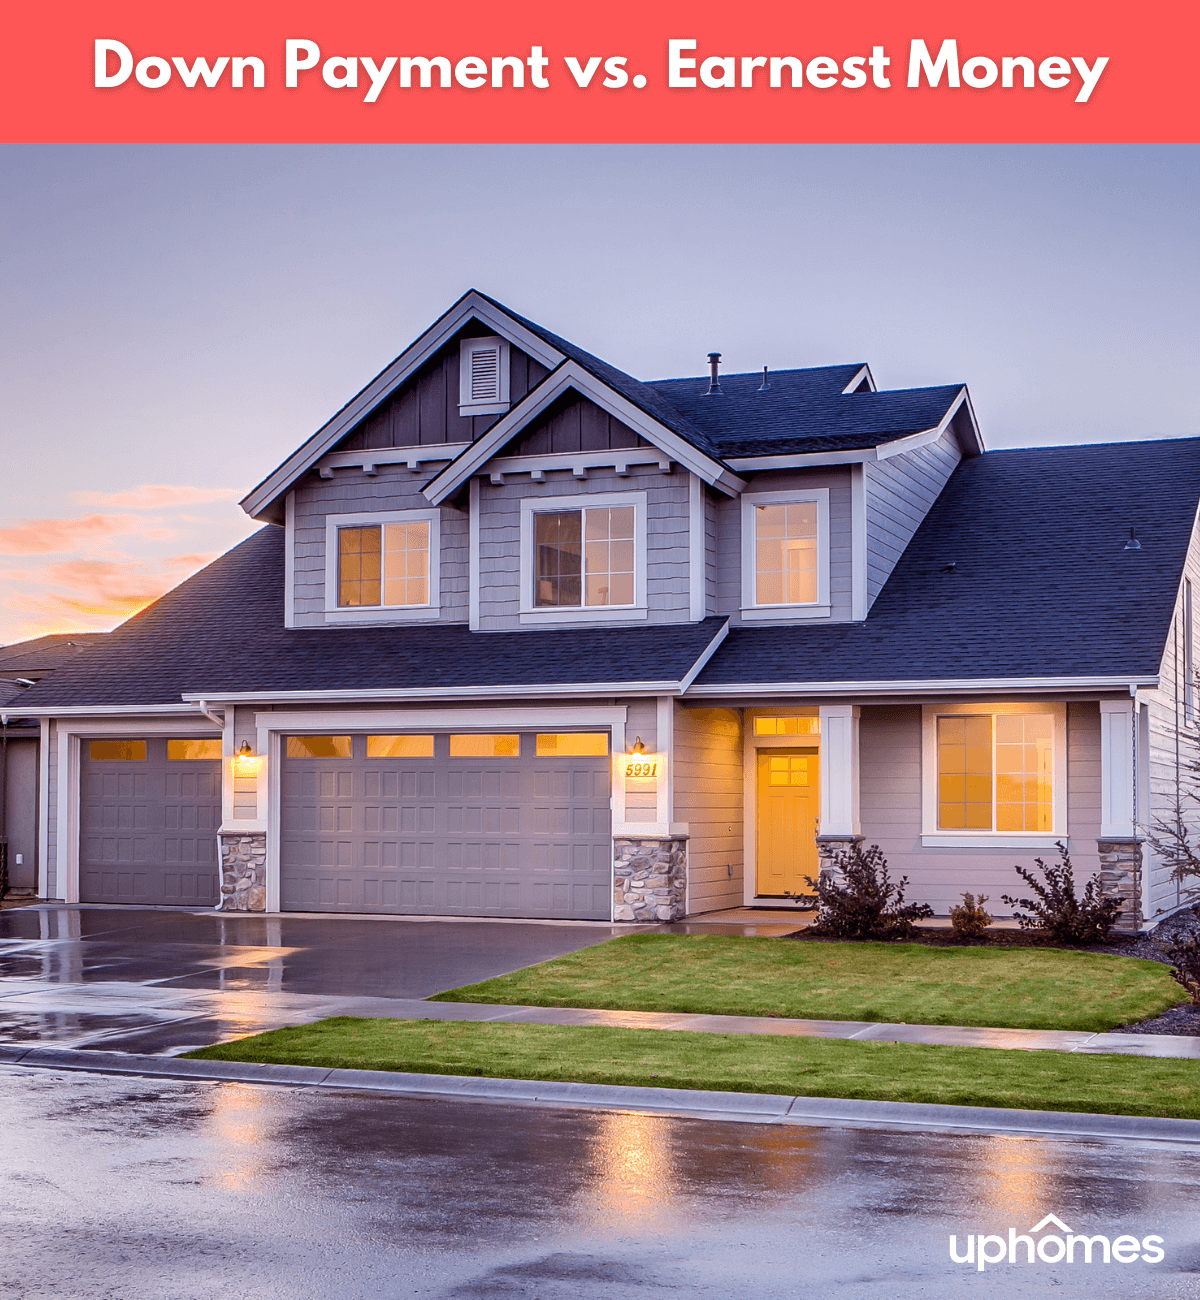 Down payment money vs earnest money - how do they differ?